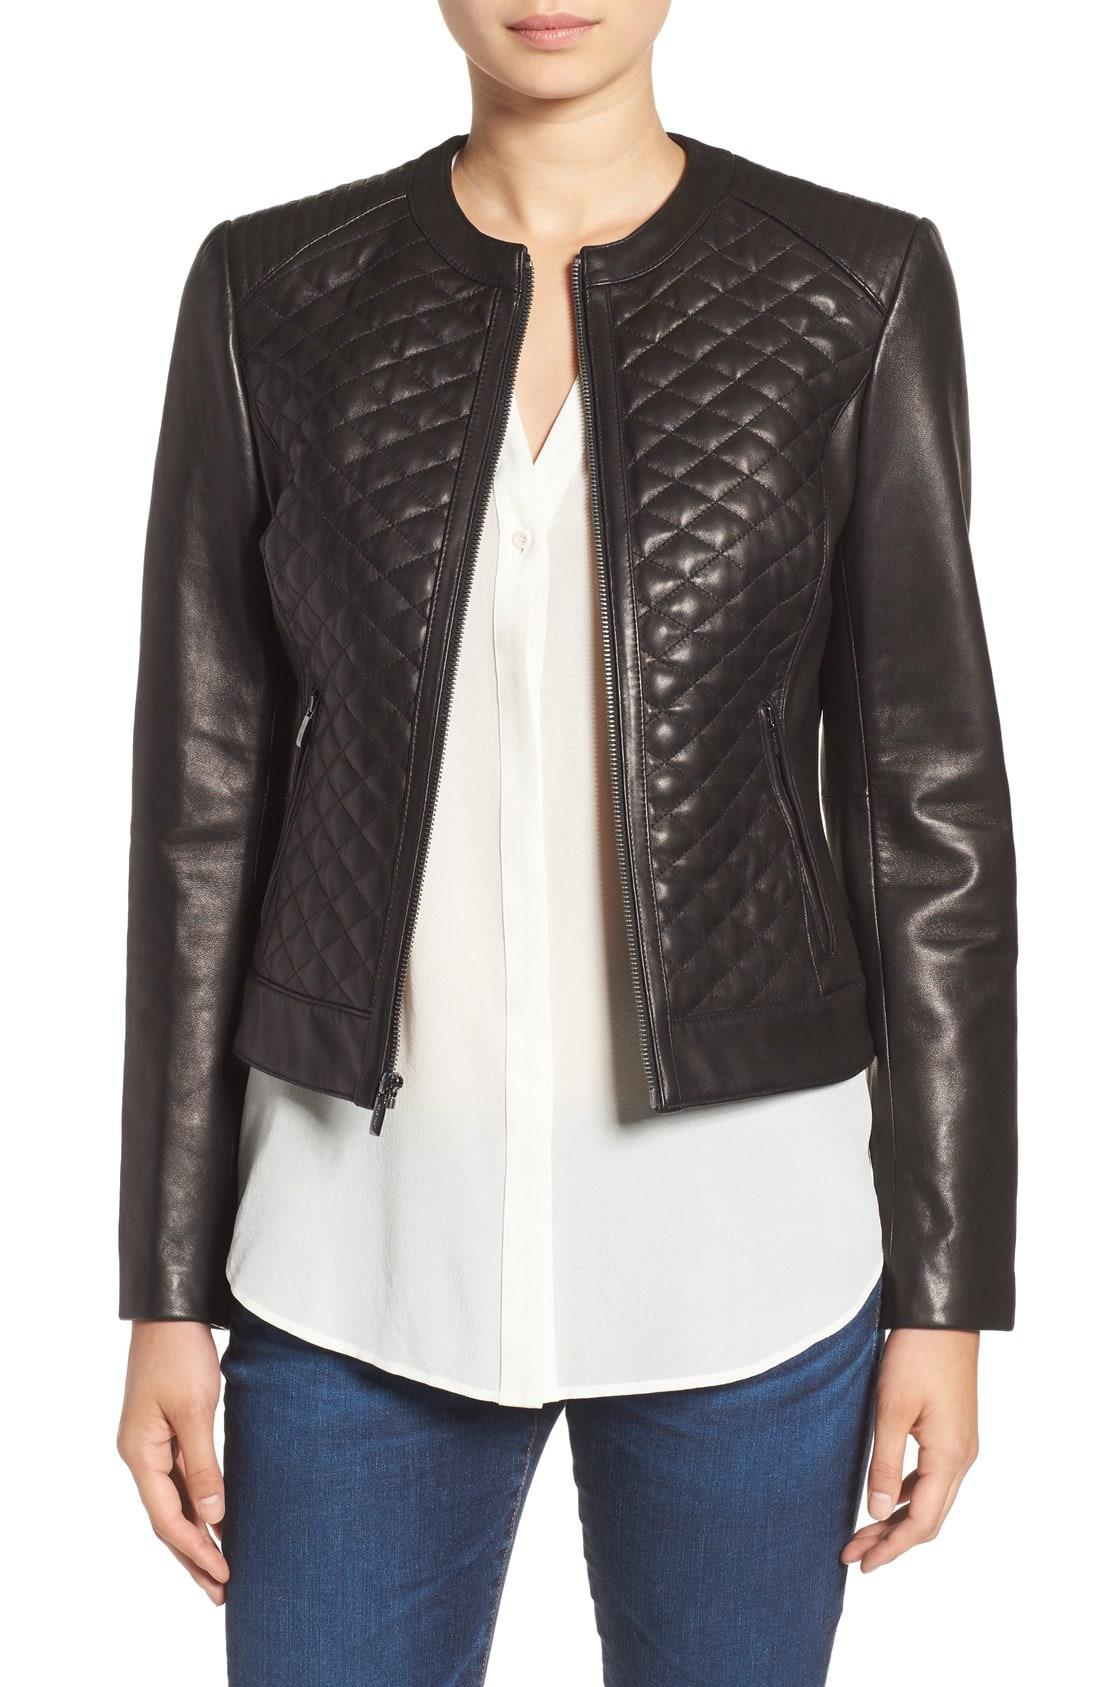 Lyst - Cole Haan Quilted Leather Moto Jacket in Black